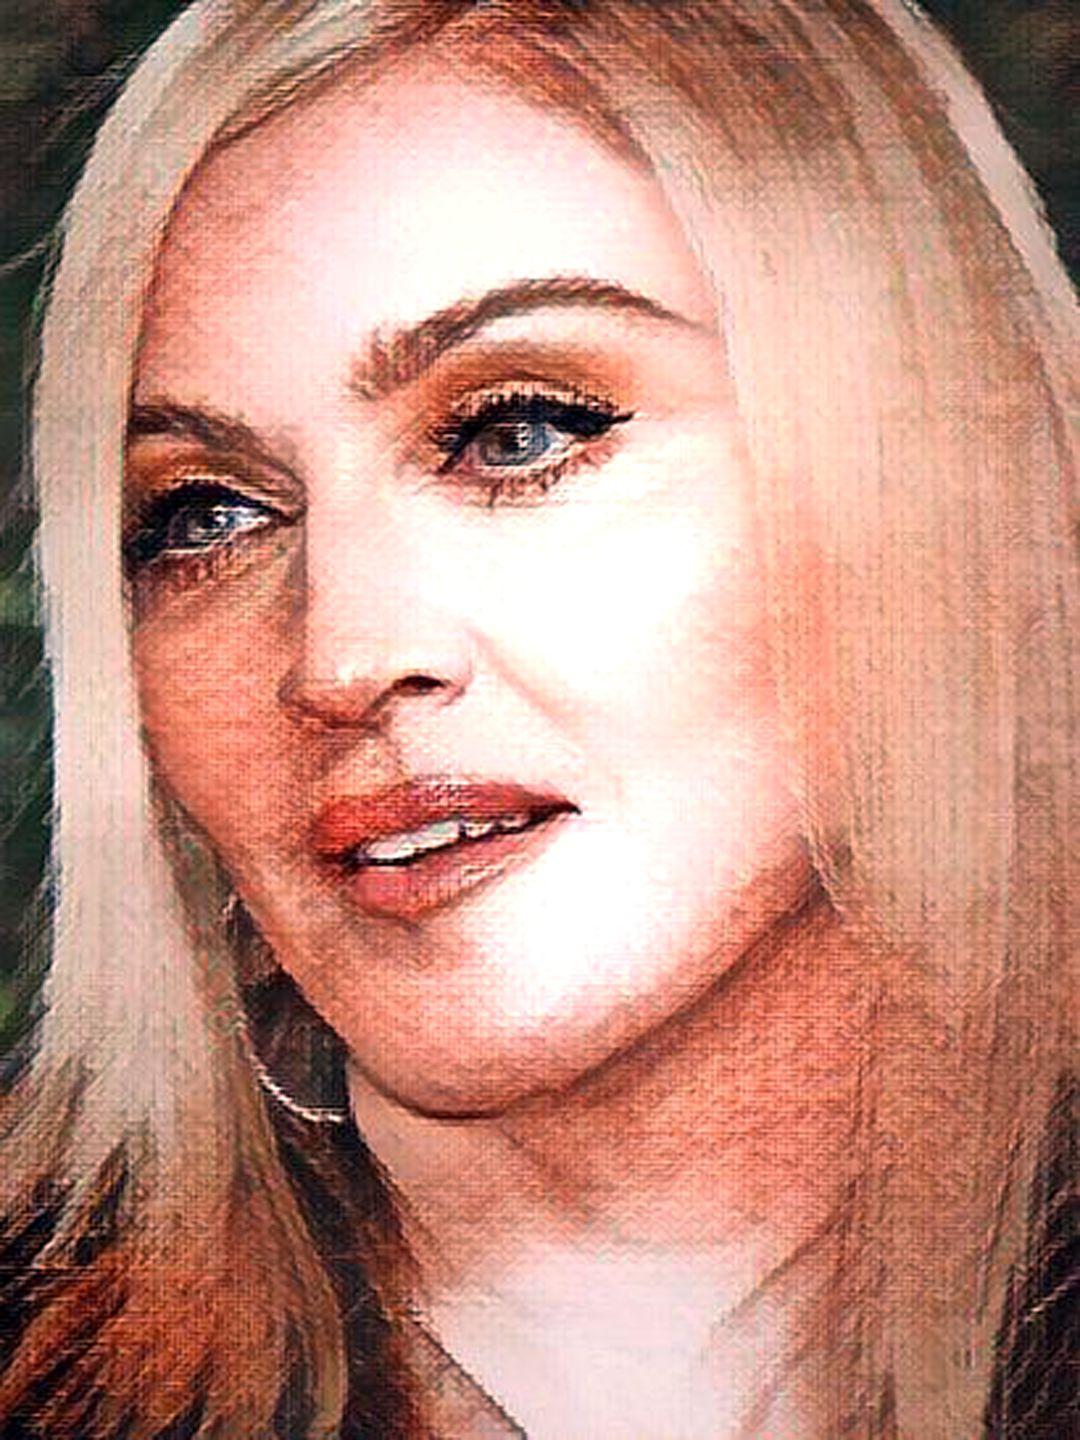 4chan Amateur Lesbian Sex - Madonna # 36 - Celeb ART - Beautiful Artworks of Celebrities, Footballers,  Politicians and Famous People in World | OpenSea